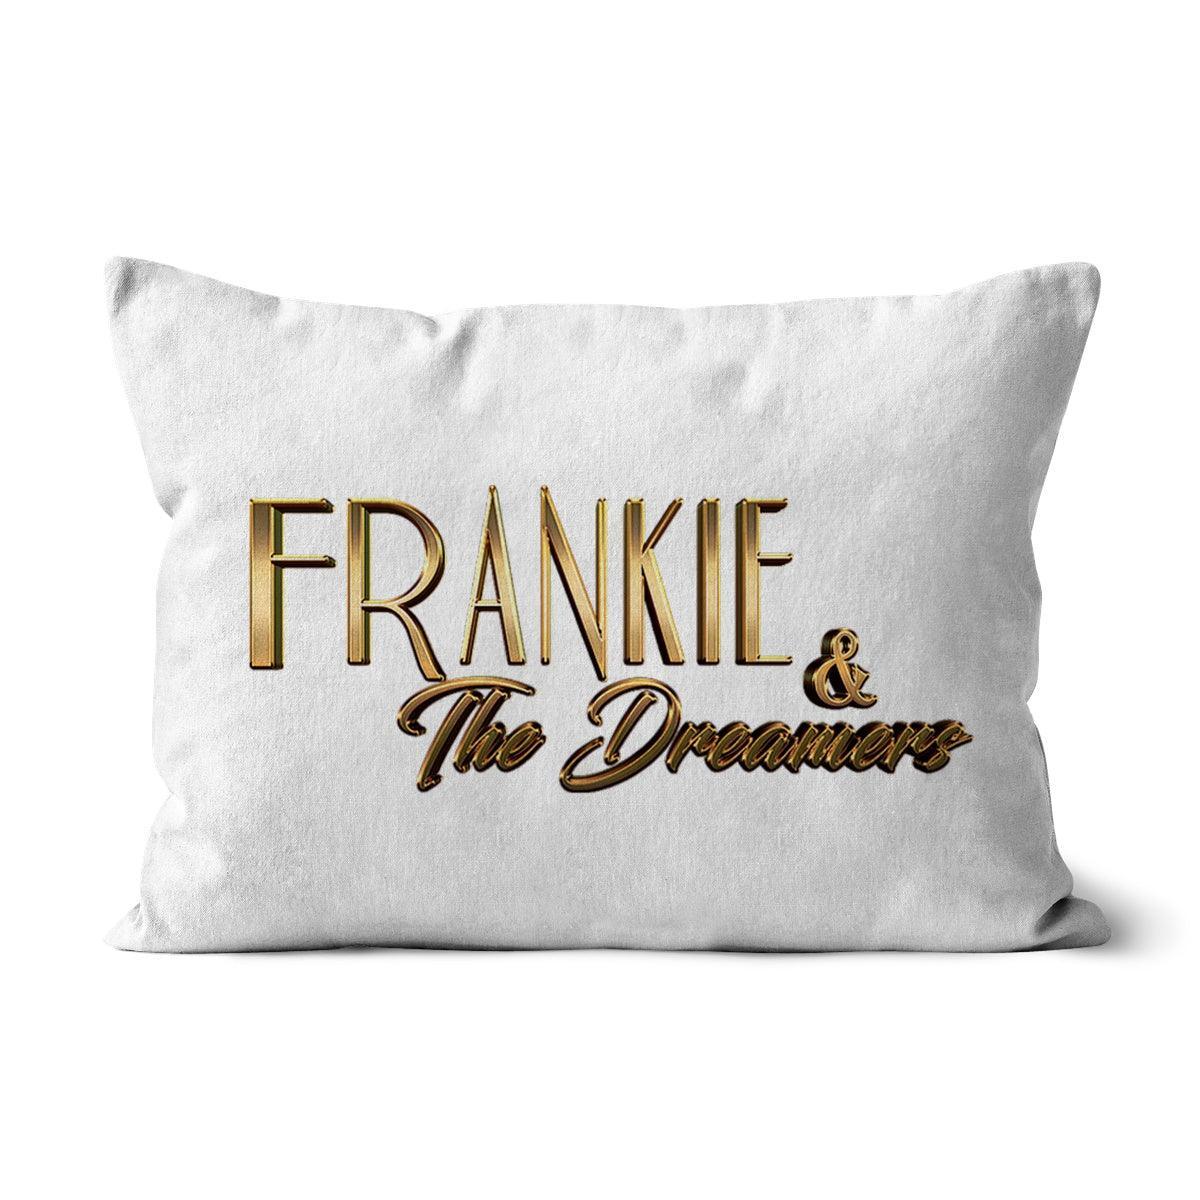 Frankie And The Dreamers Cushion | Homeware Canvas 19"x13"